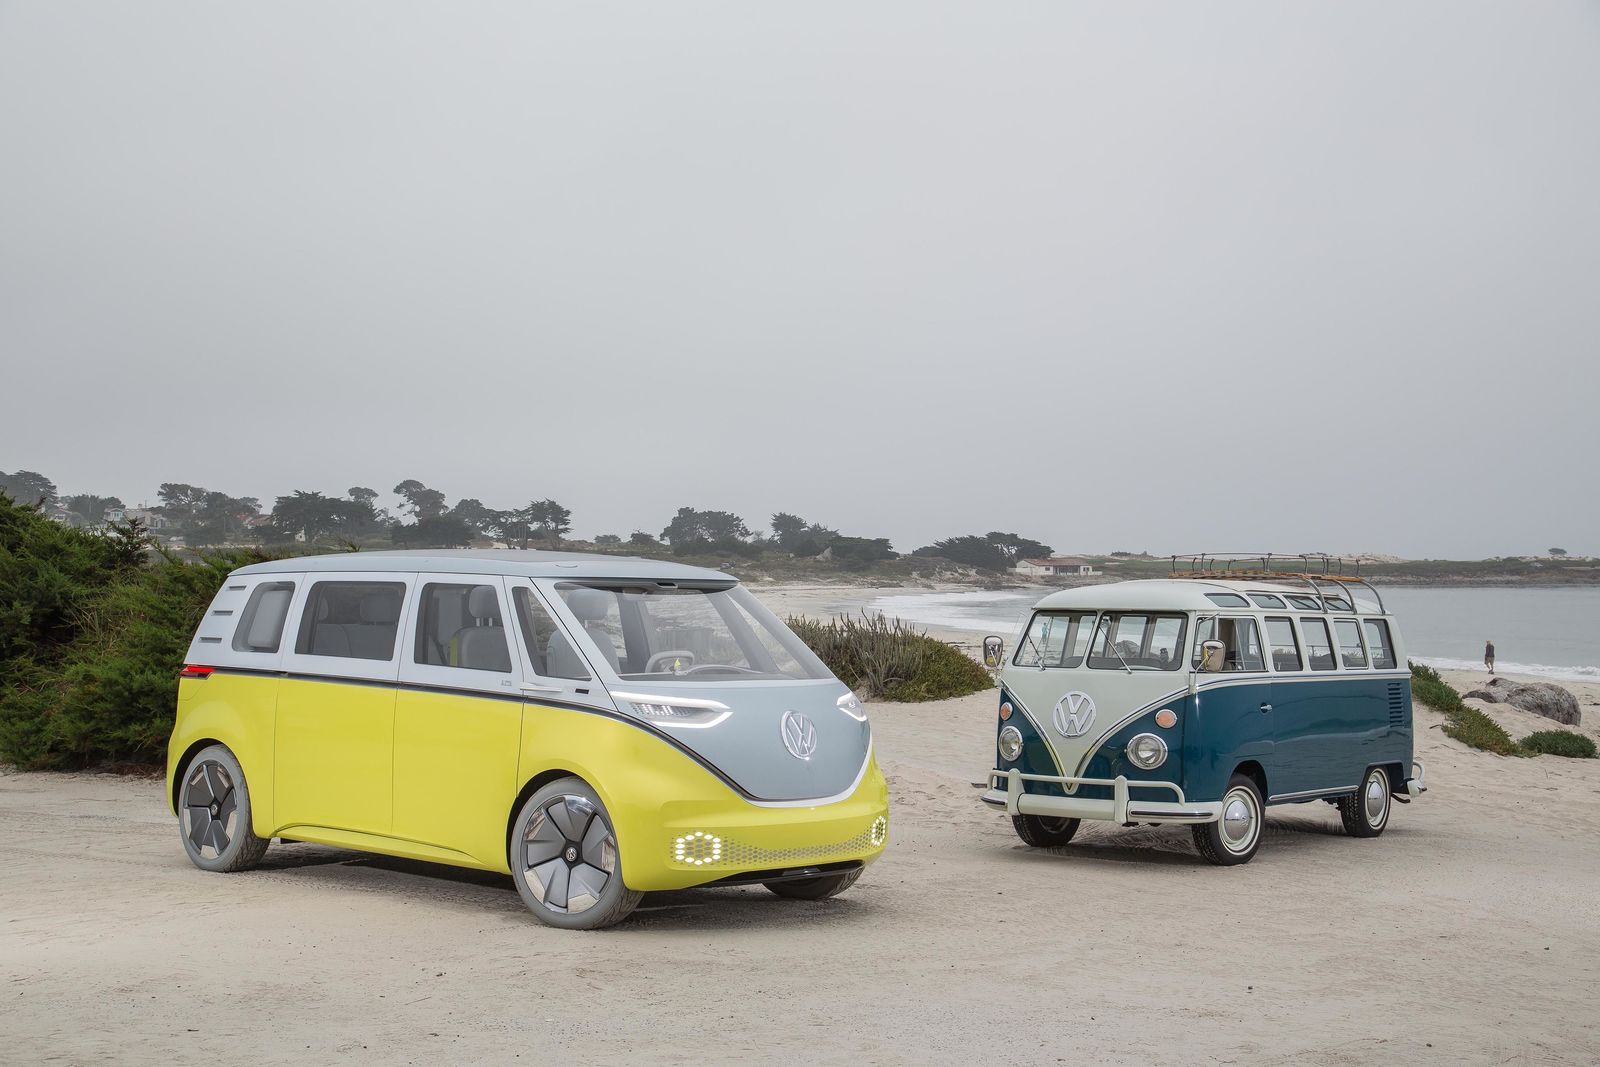 Decision to manufacture an electric VW Microbus based on the iconic design of the ID. BUZZ concept